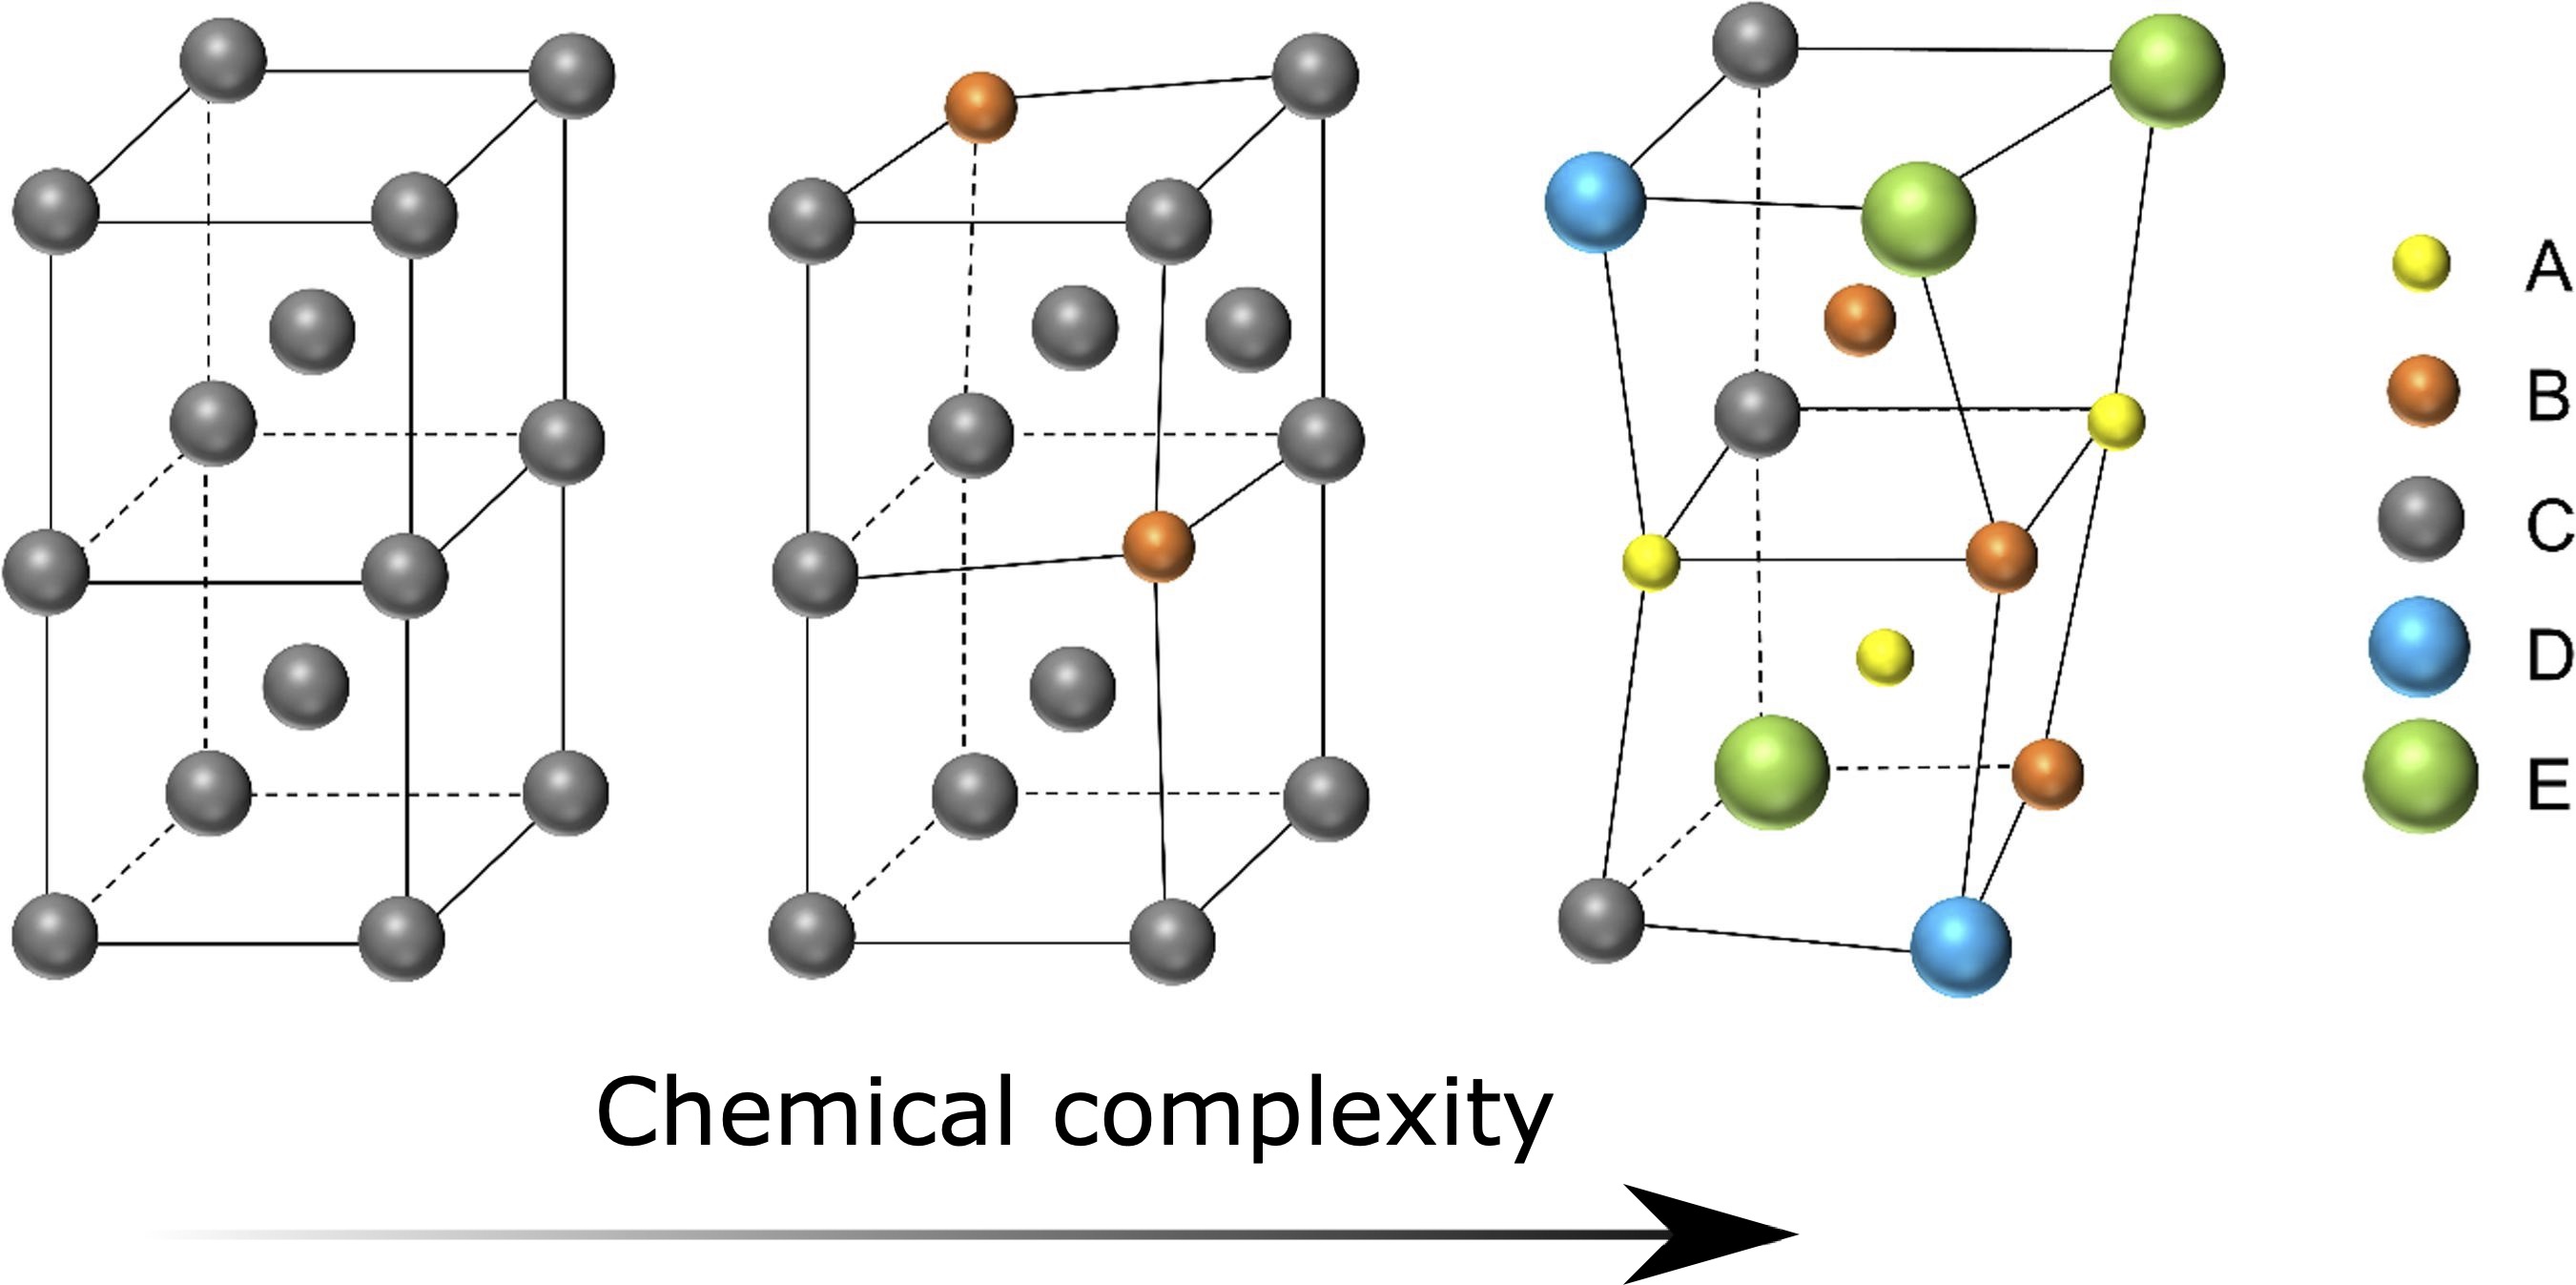 Chemically complex materials